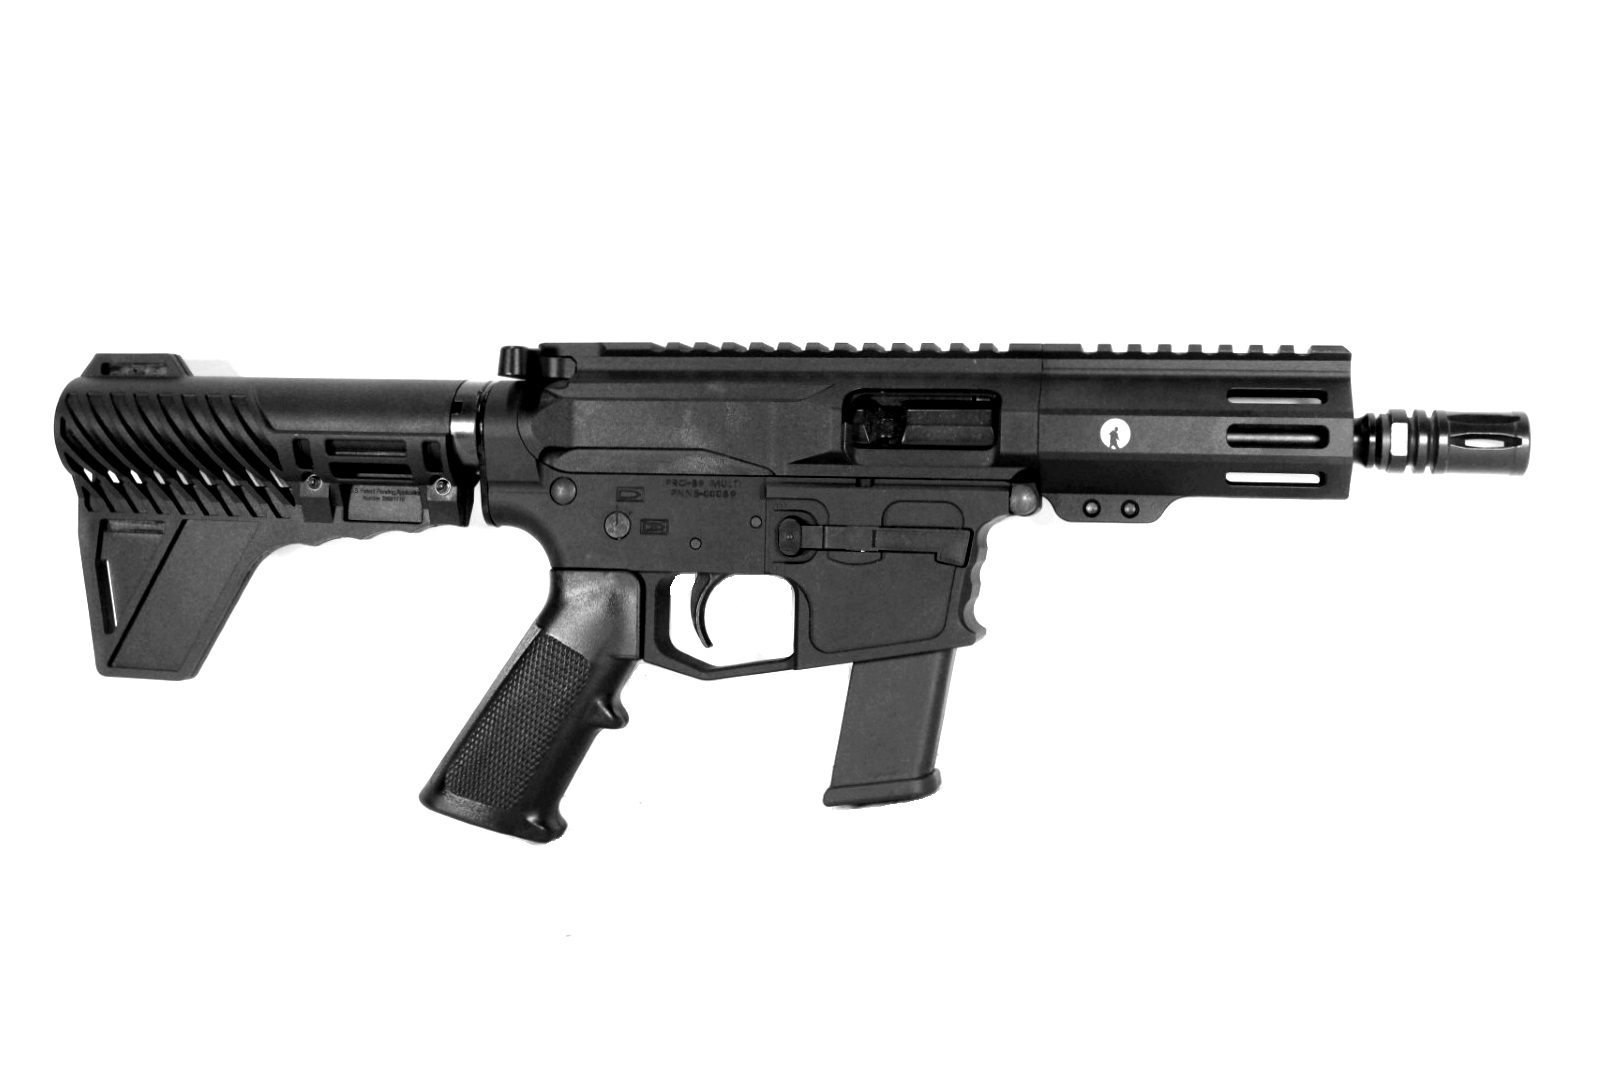 5.5 inch 40 S&W AR-15 Pistol | Made in the USA